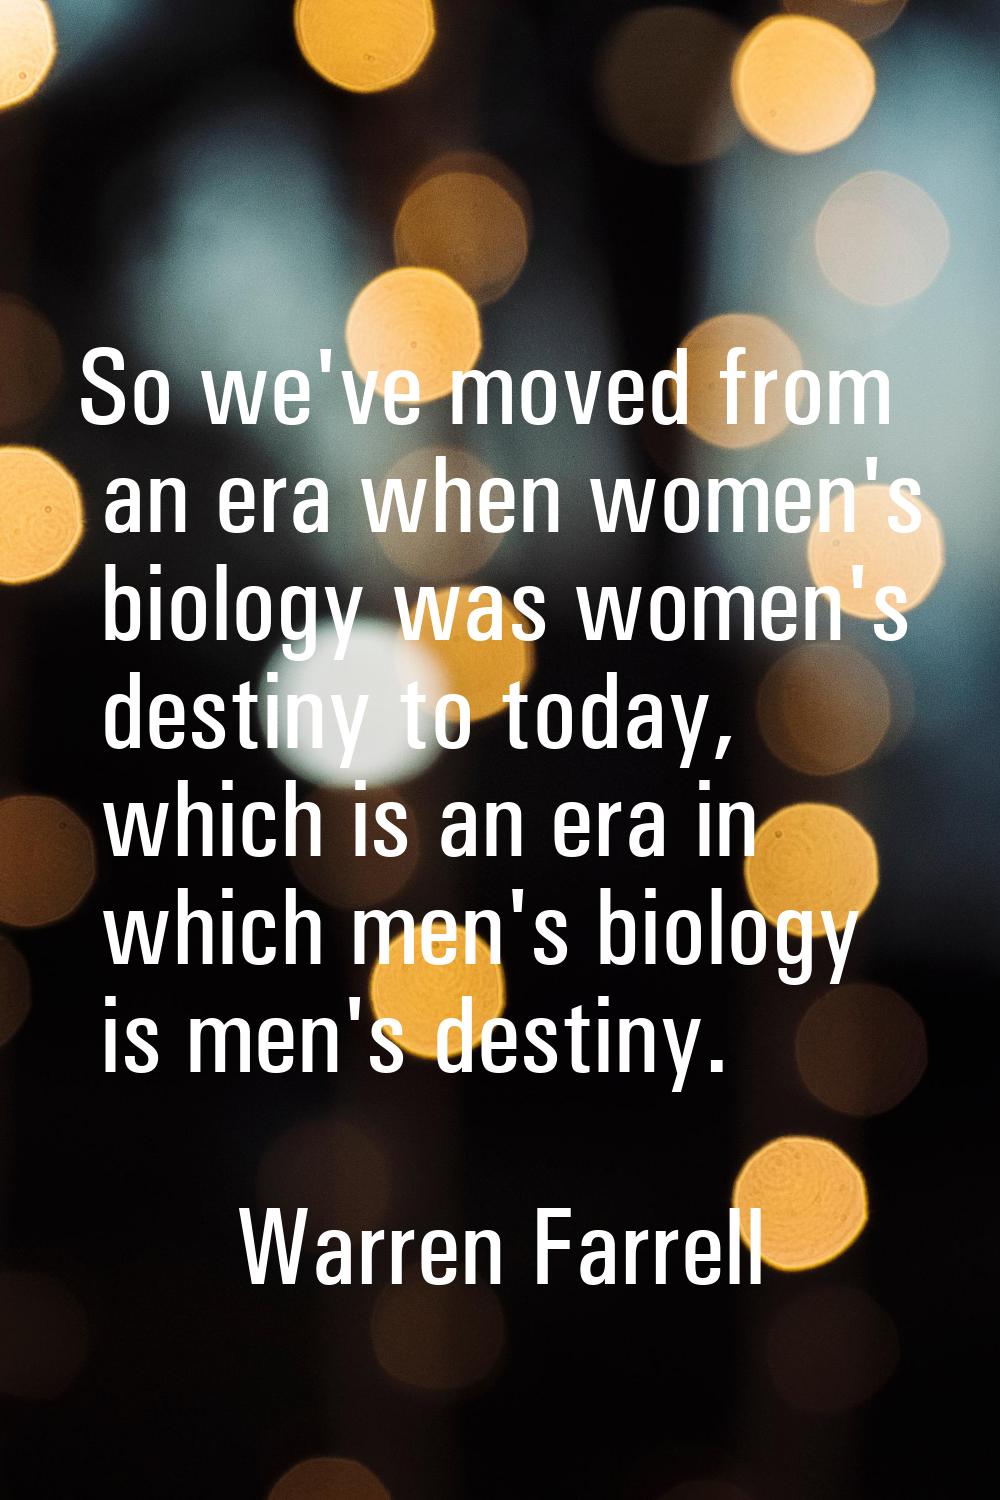 So we've moved from an era when women's biology was women's destiny to today, which is an era in wh